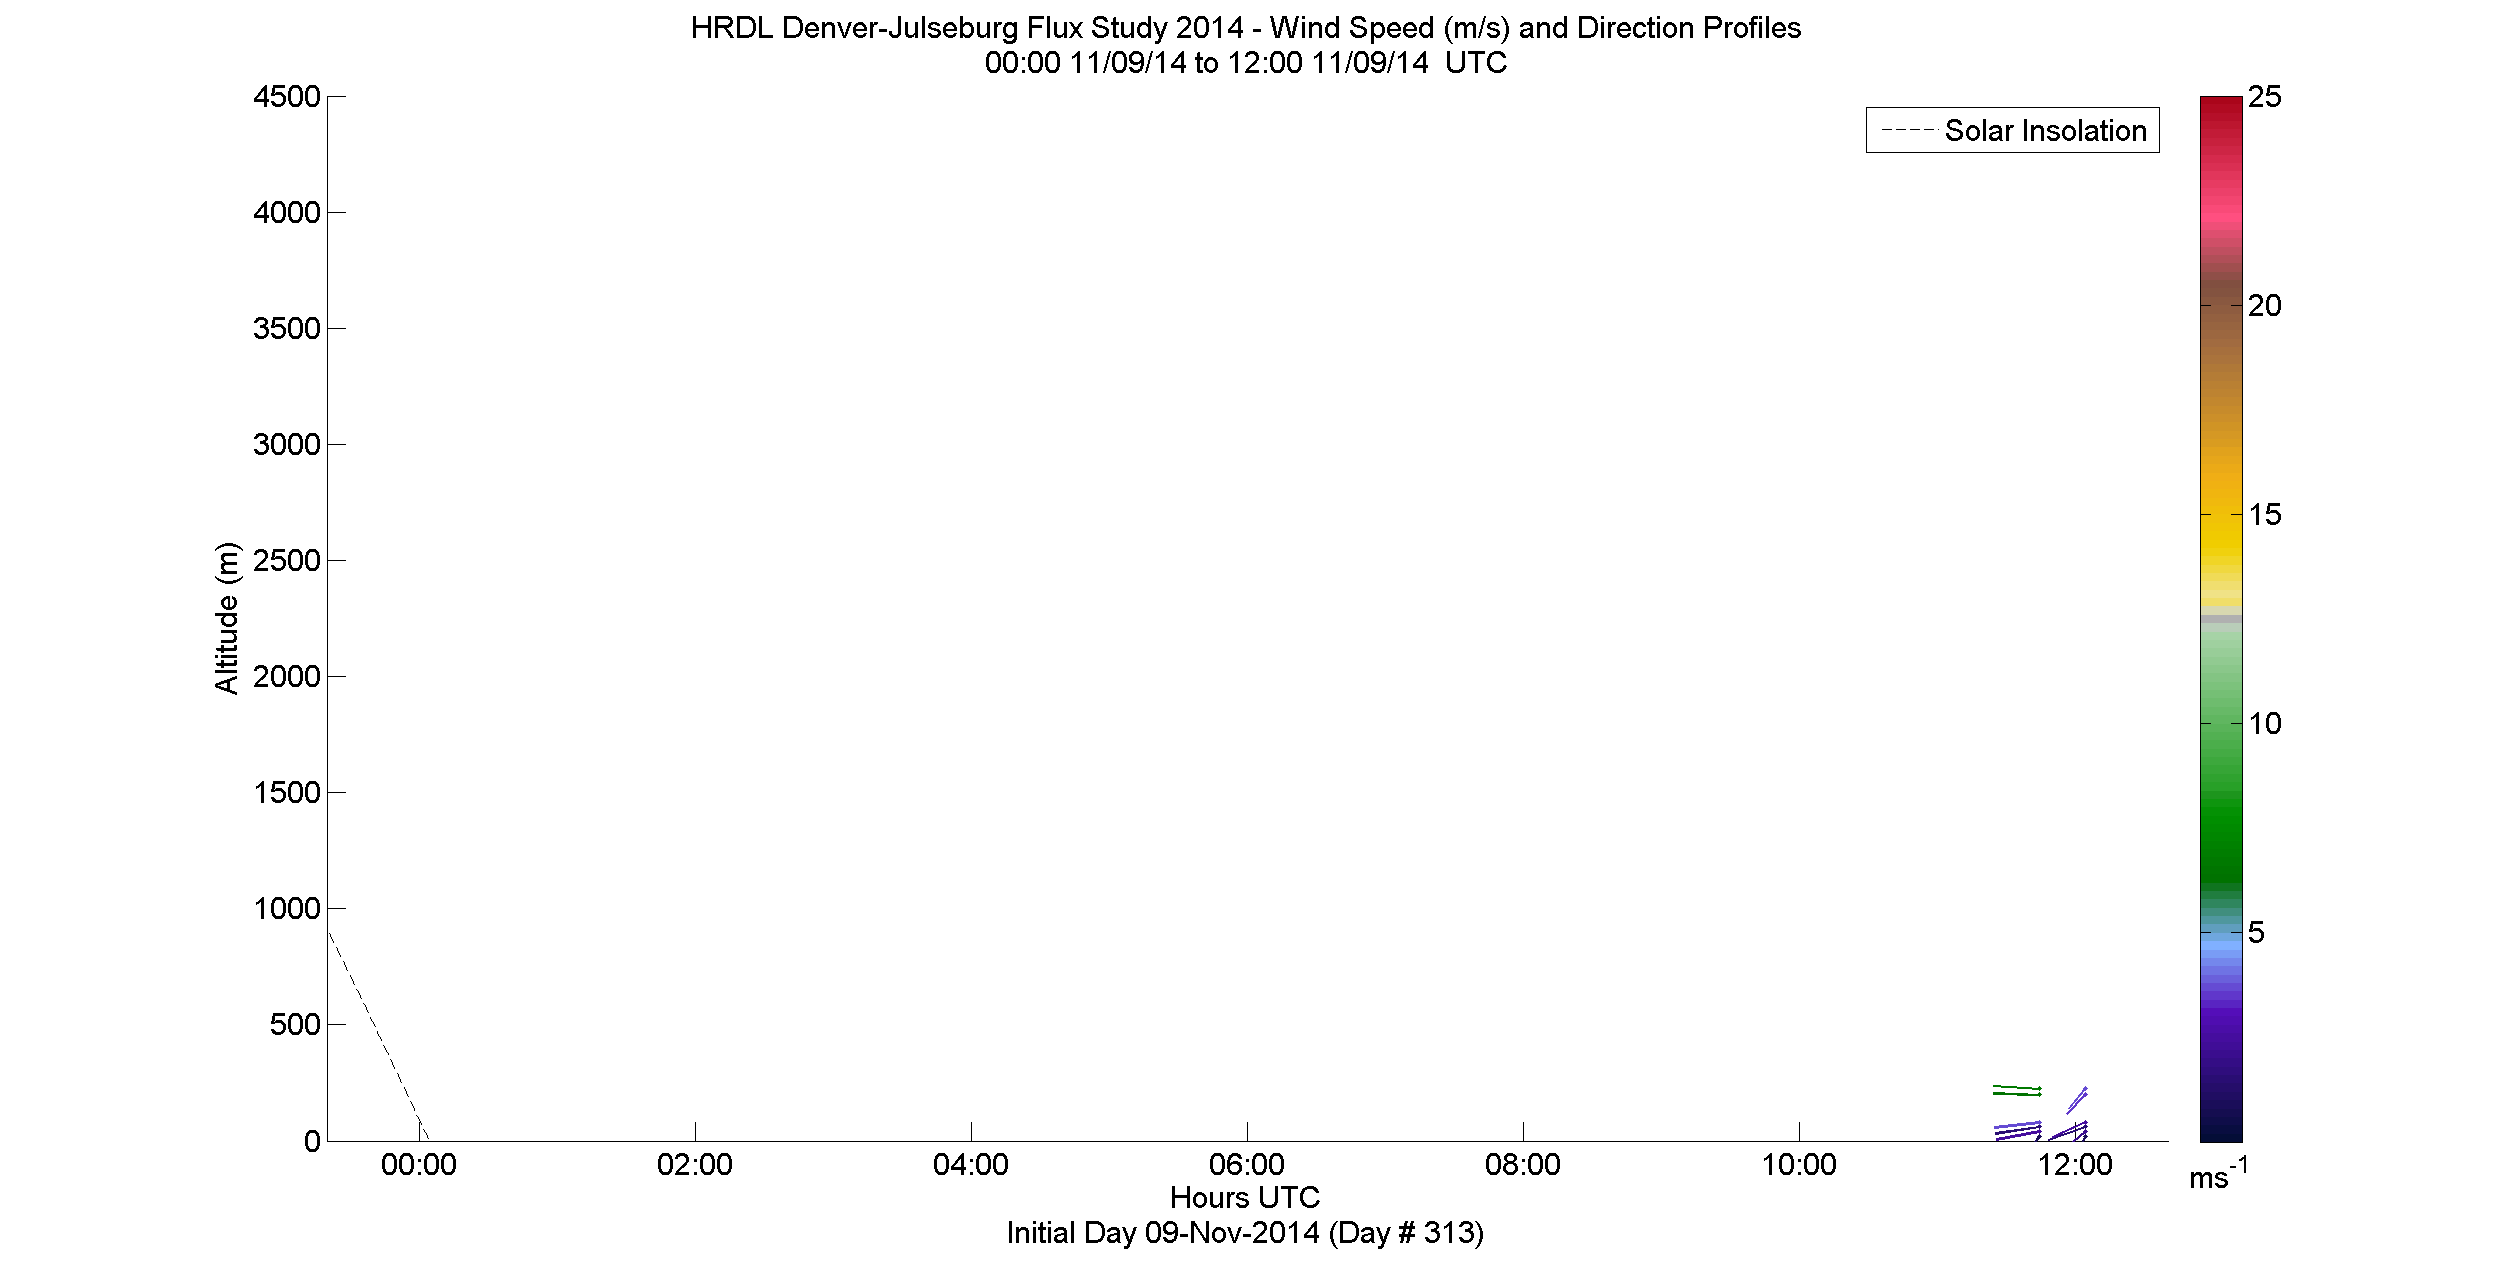 HRDL speed and direction profile - November 9 am